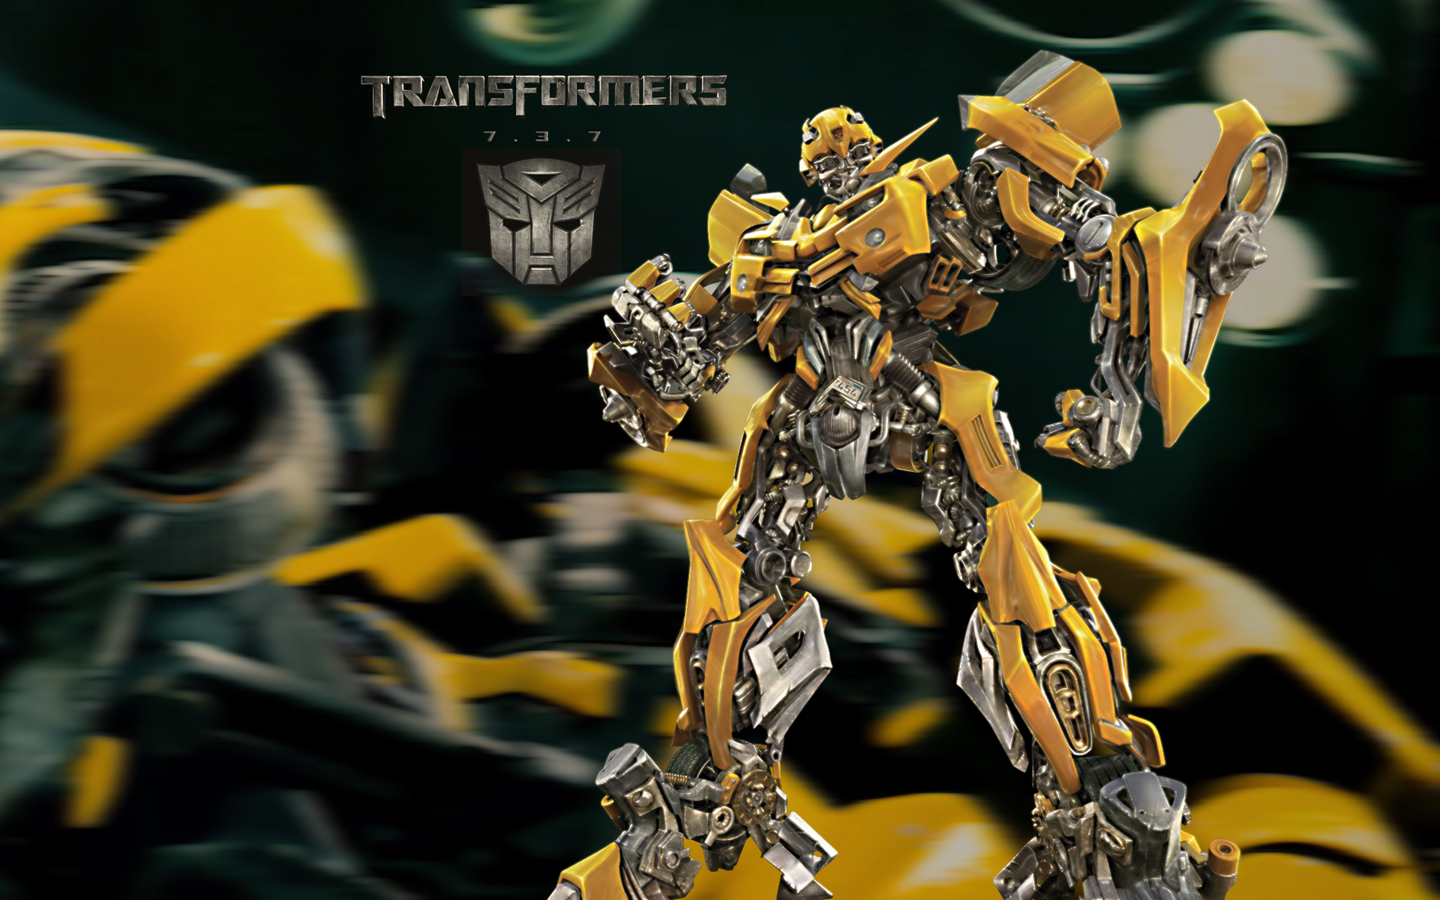 Transformers wallpapers 1440x900